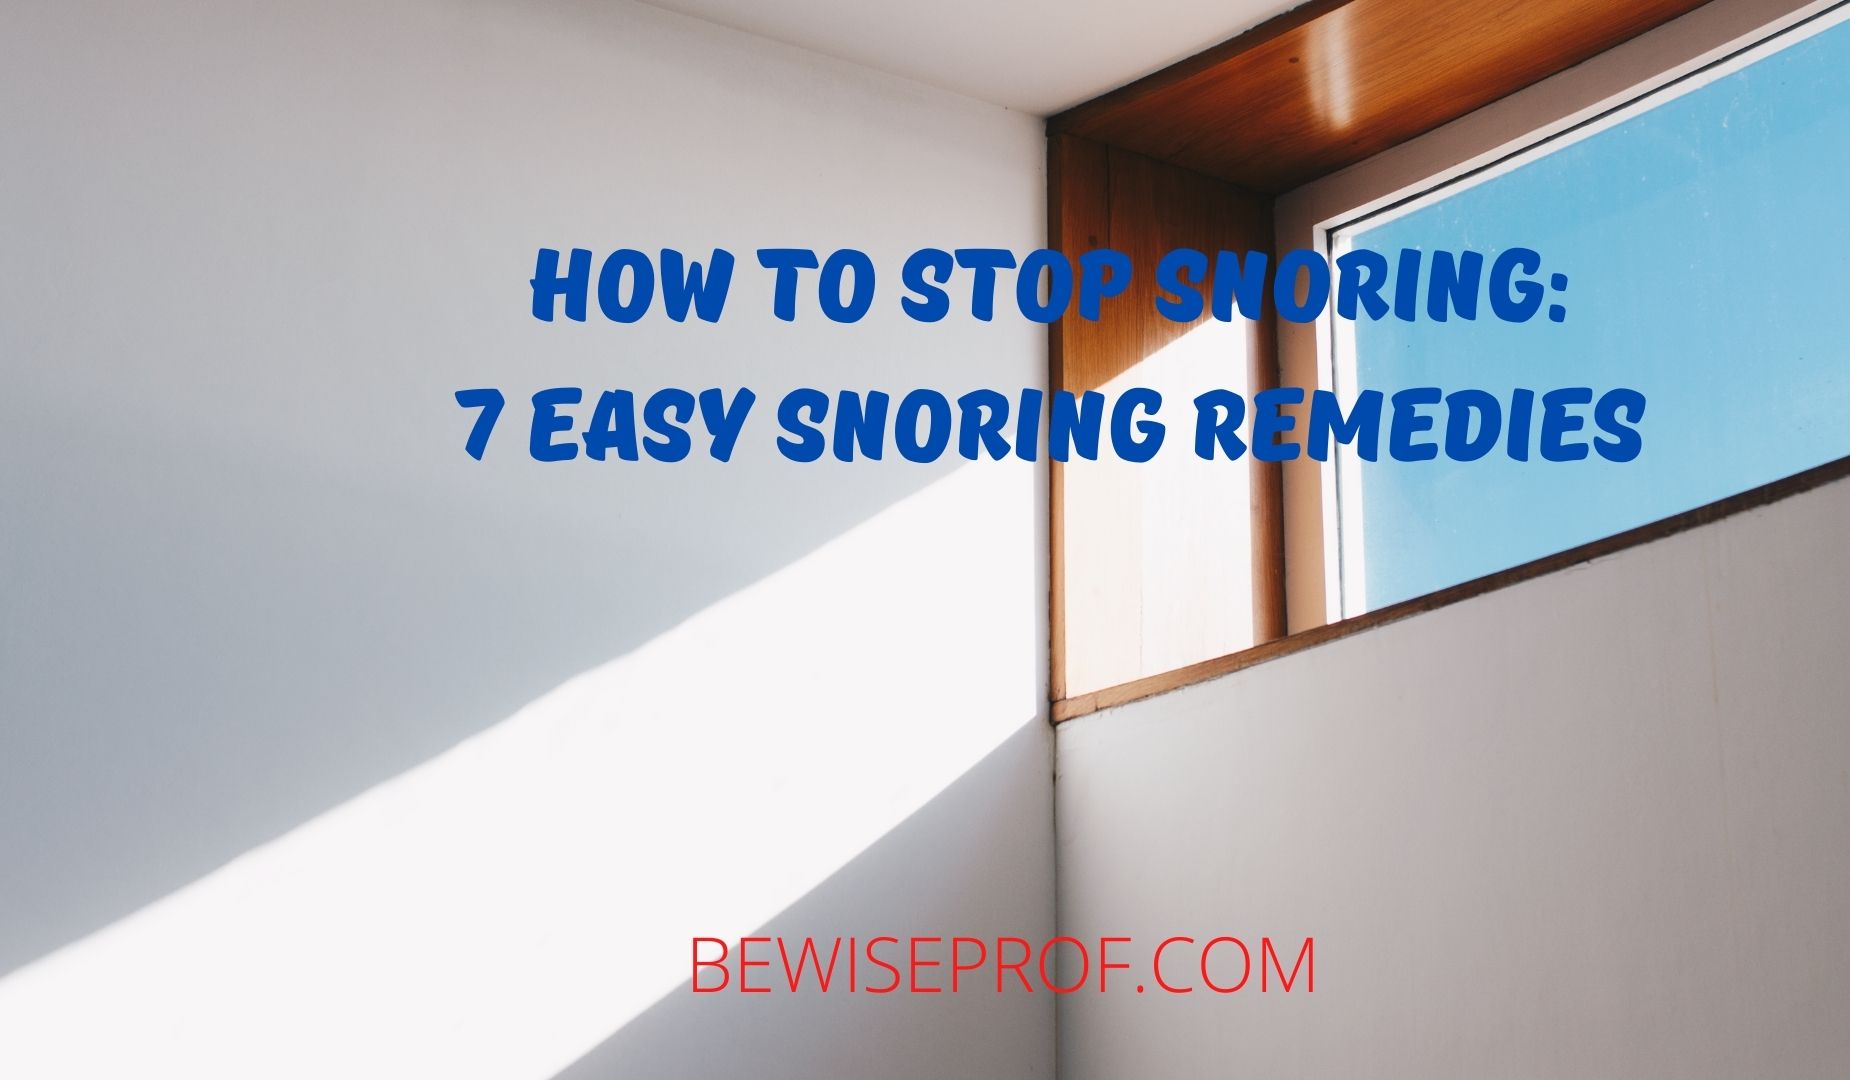 How to Stop Snoring: 7 Easy Snoring Remedies